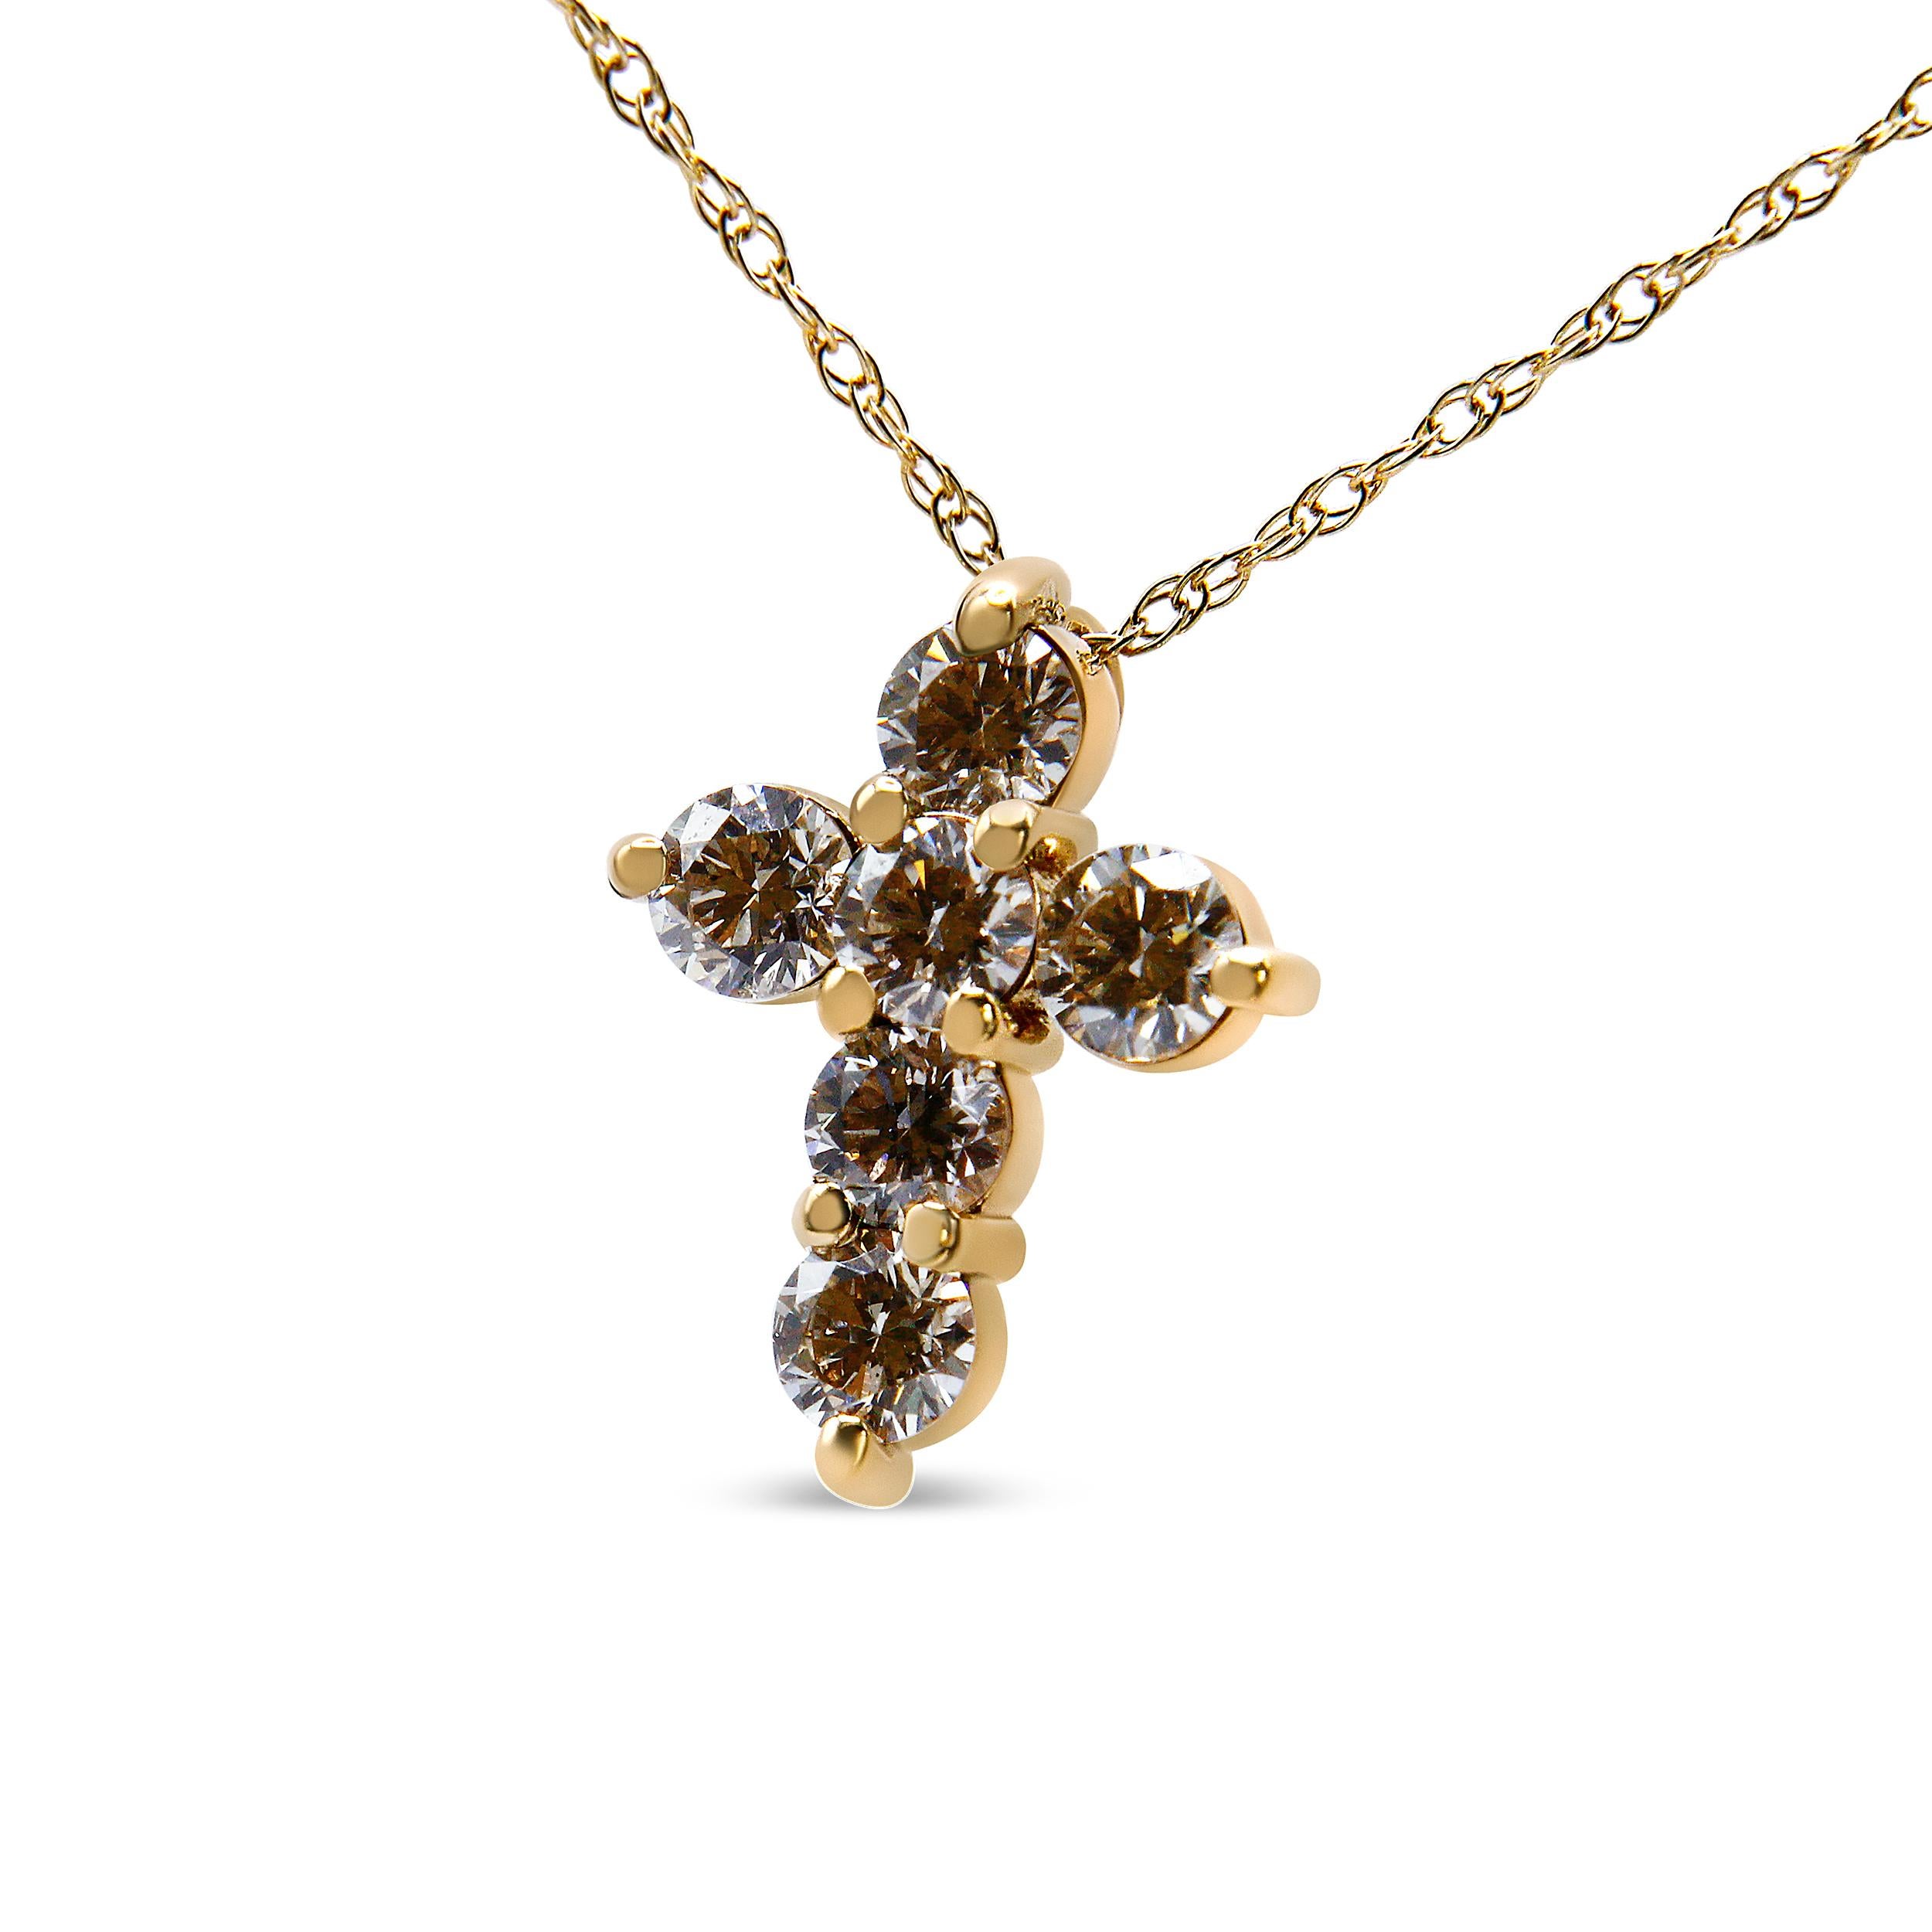 Showcase your inner devotion with this striking 1/2 c.t. diamond cross necklace. The pendant is crafted in 14k yellow gold, a metal that will stay tarnish free for decades to come. The cross motif is embellished with 6 sparkling, natural round-cut